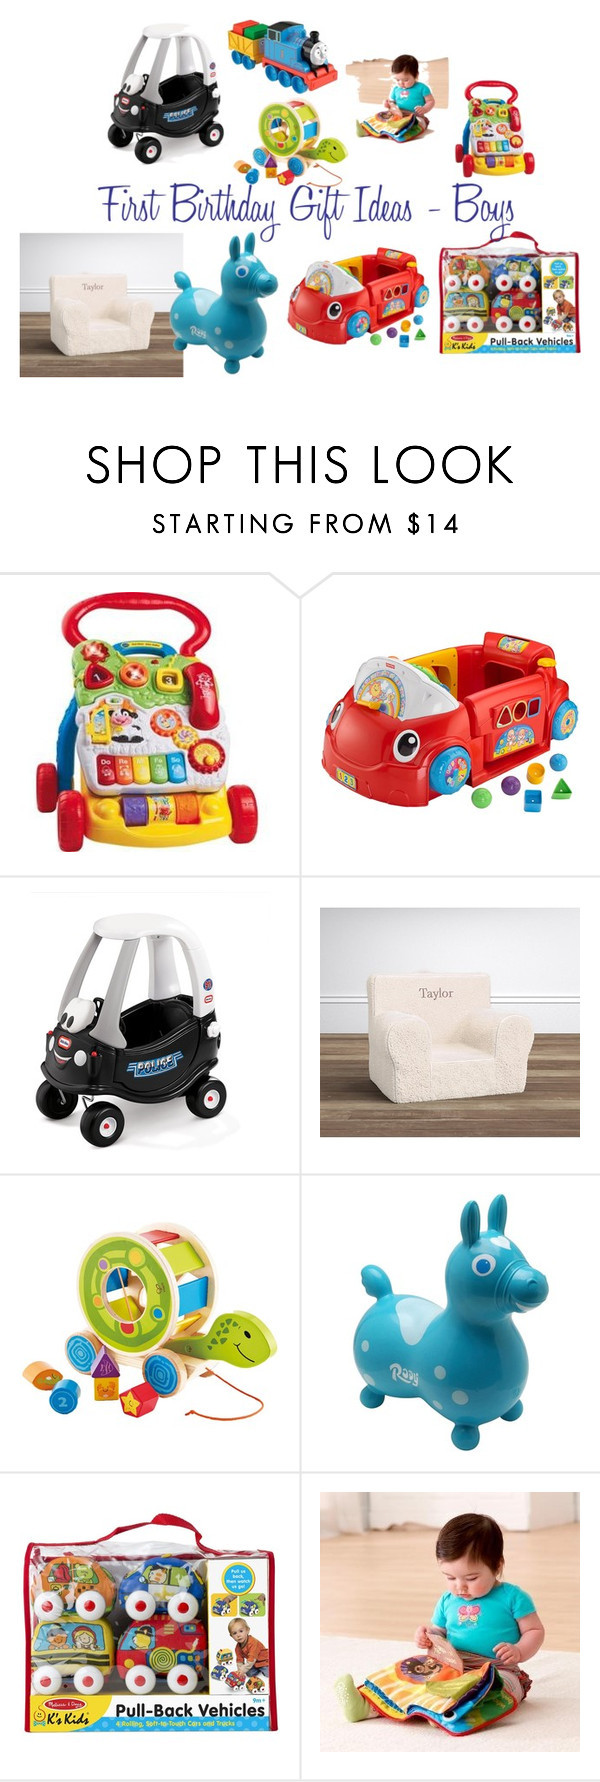 1St Birthday Gift Ideas For Boys
 First Birthday Gift Ideas Boys by candice moretti on